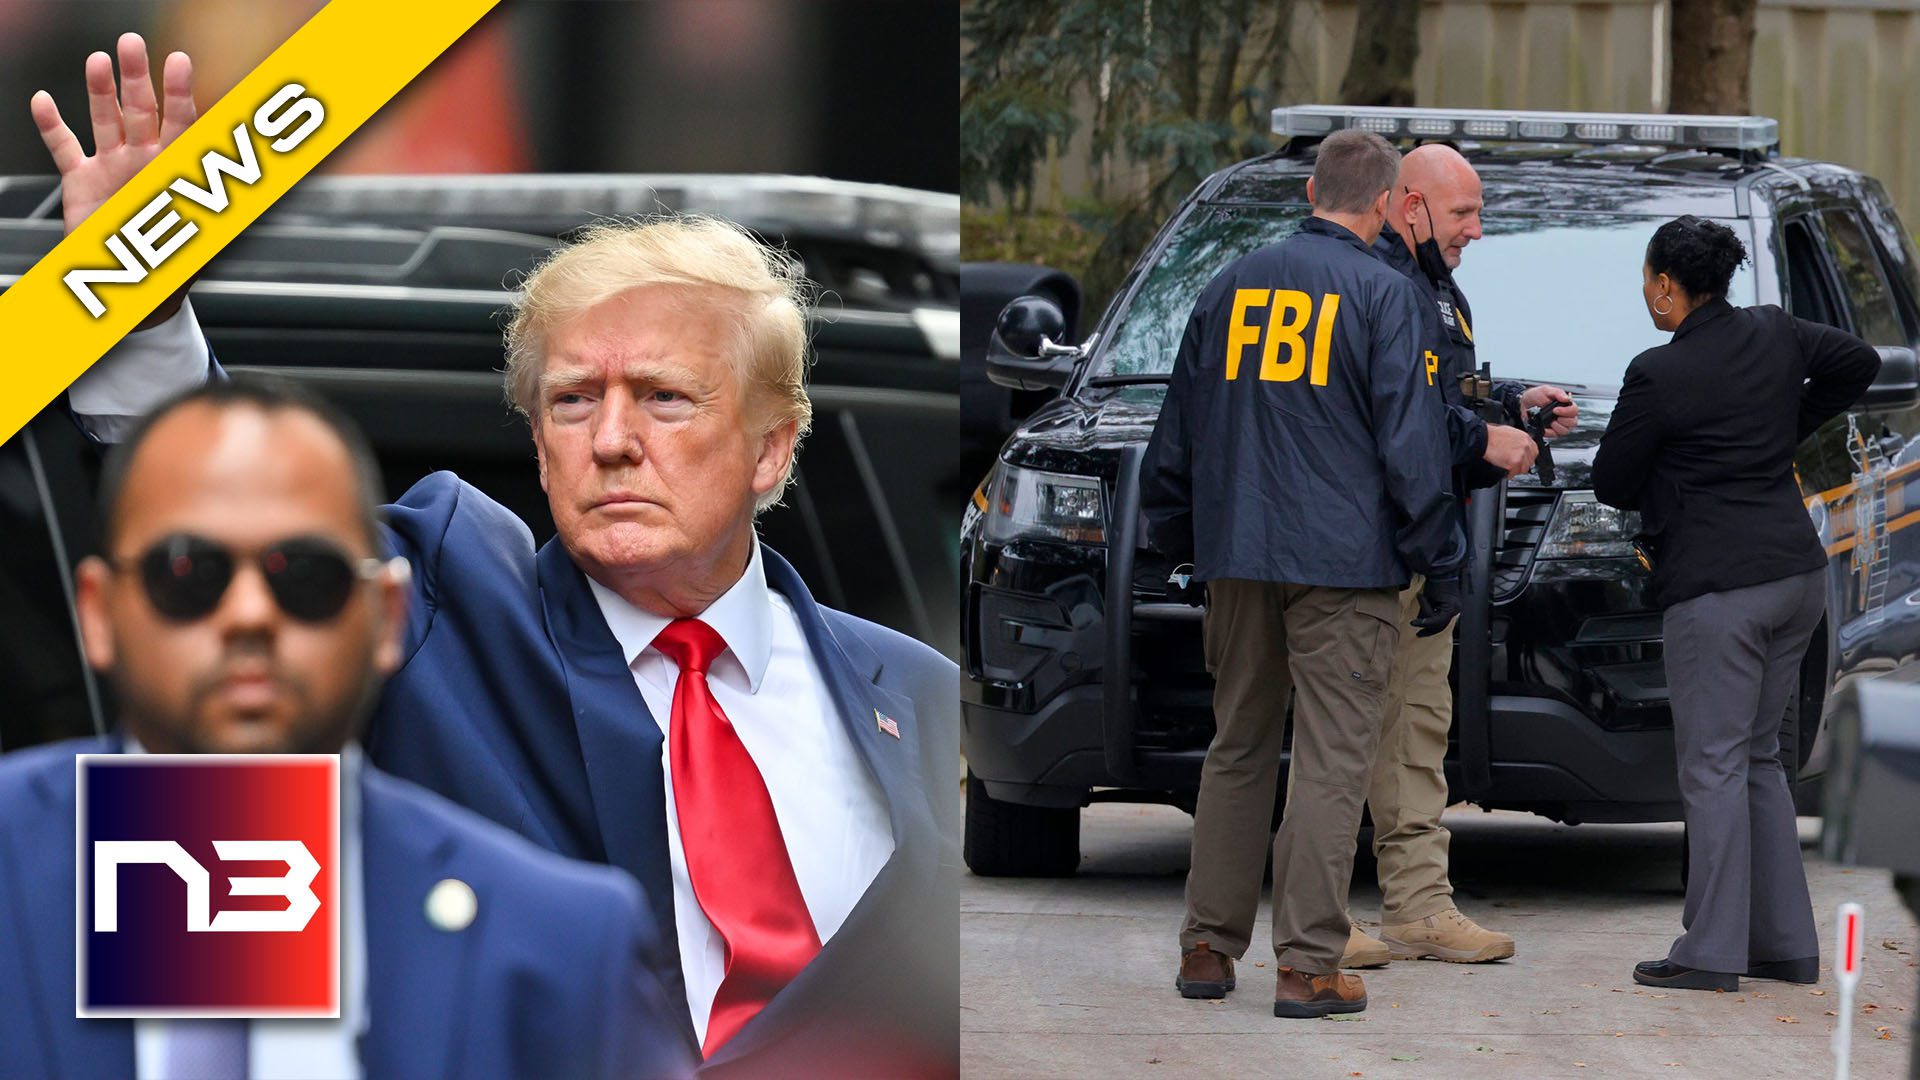 How Truth Social Changed After the Mar-a-Lago Raid - Spoiler Alert: IT’S EPIC